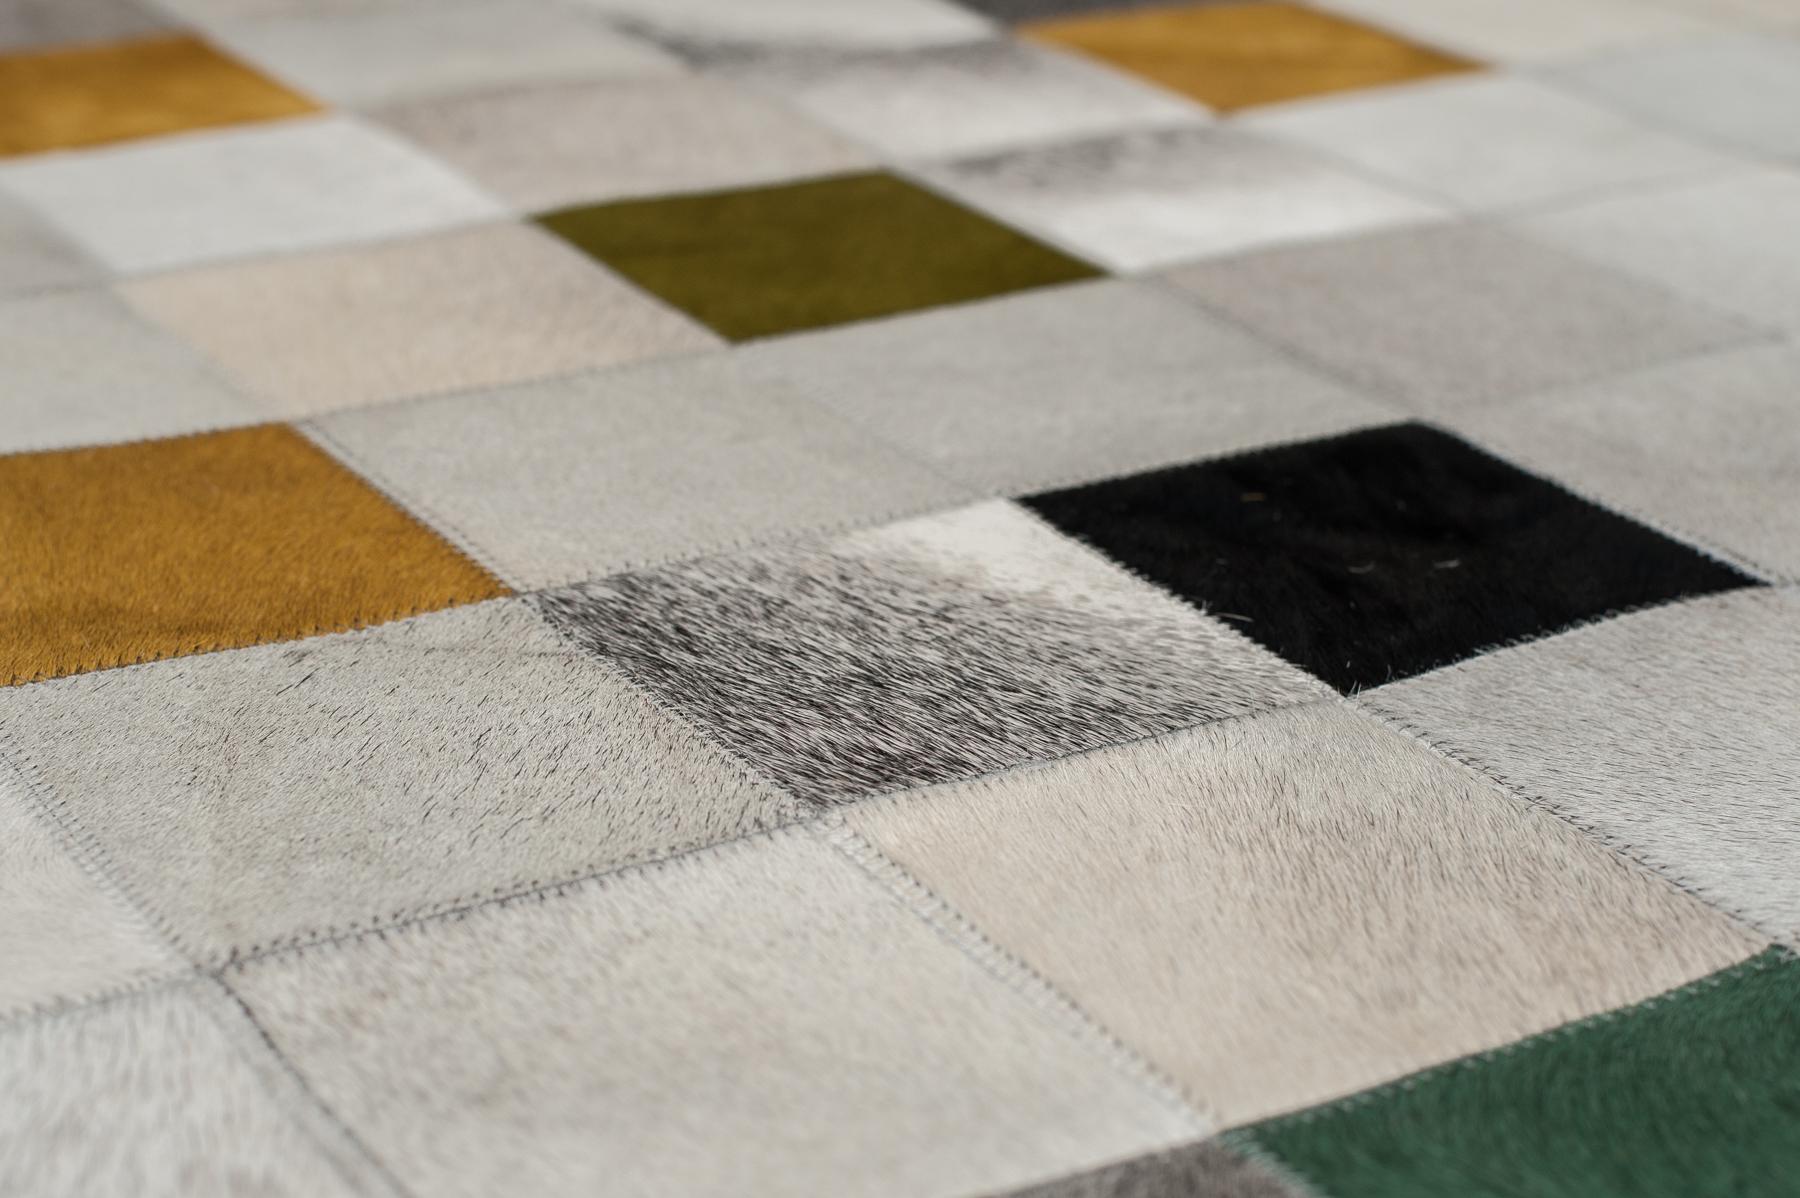 A playful, yet striking new release under our Alta line, the Falling Squares rug will add spades of charisma and sophistication to your interior. The Verde colourway is combined with natural grey shades to create a warm and rich texture on your